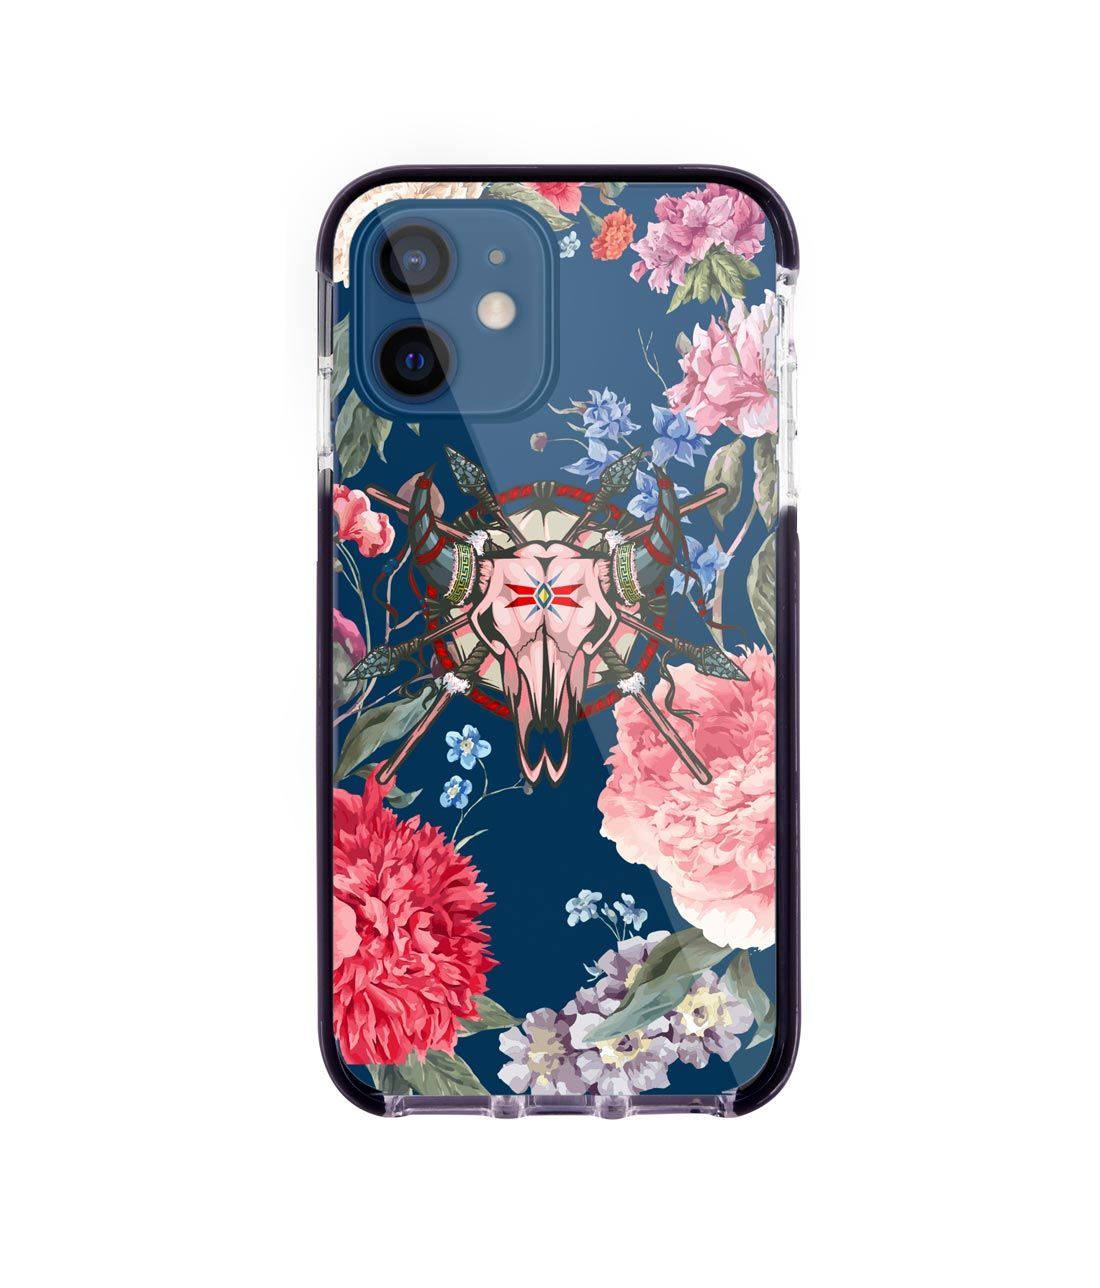 Floral Symmetry - Extreme Case for iPhone 12 Mini